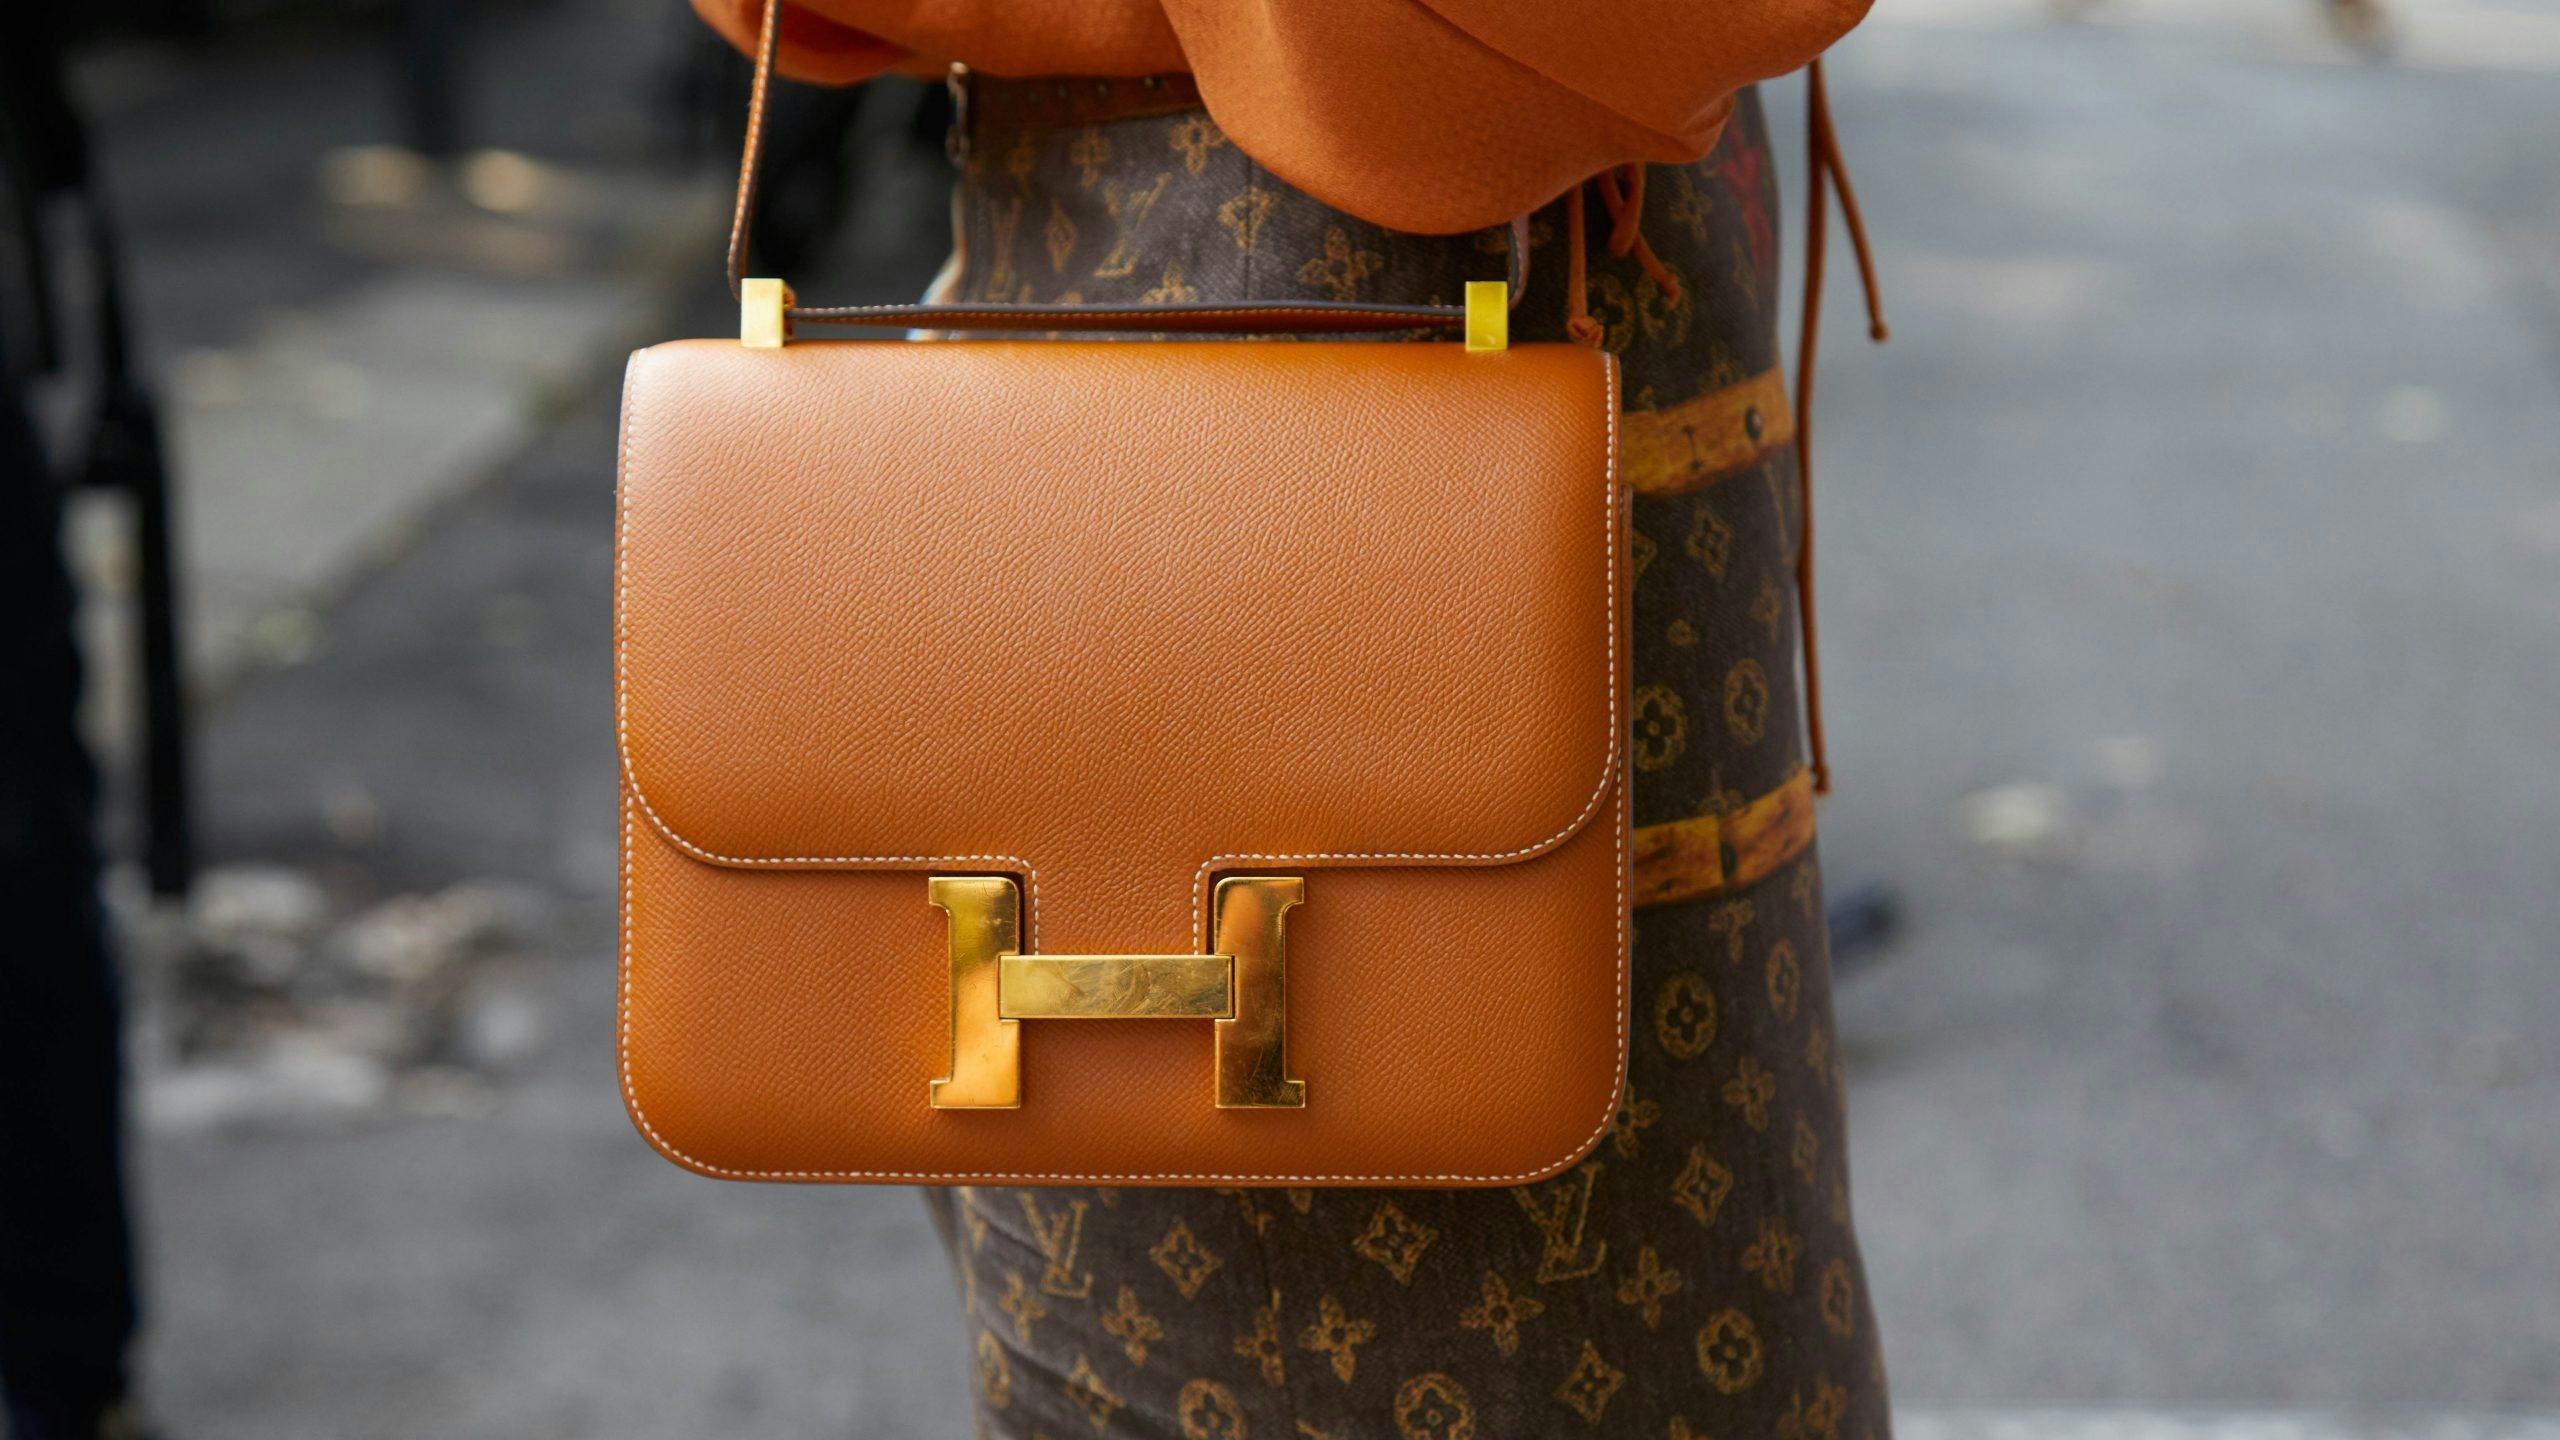 Chinese HNWIs are selling their Rolex and Hermès to raise quick cash. As the economy tumbles, is luxury really recession-proof? Photo: Shutterstock